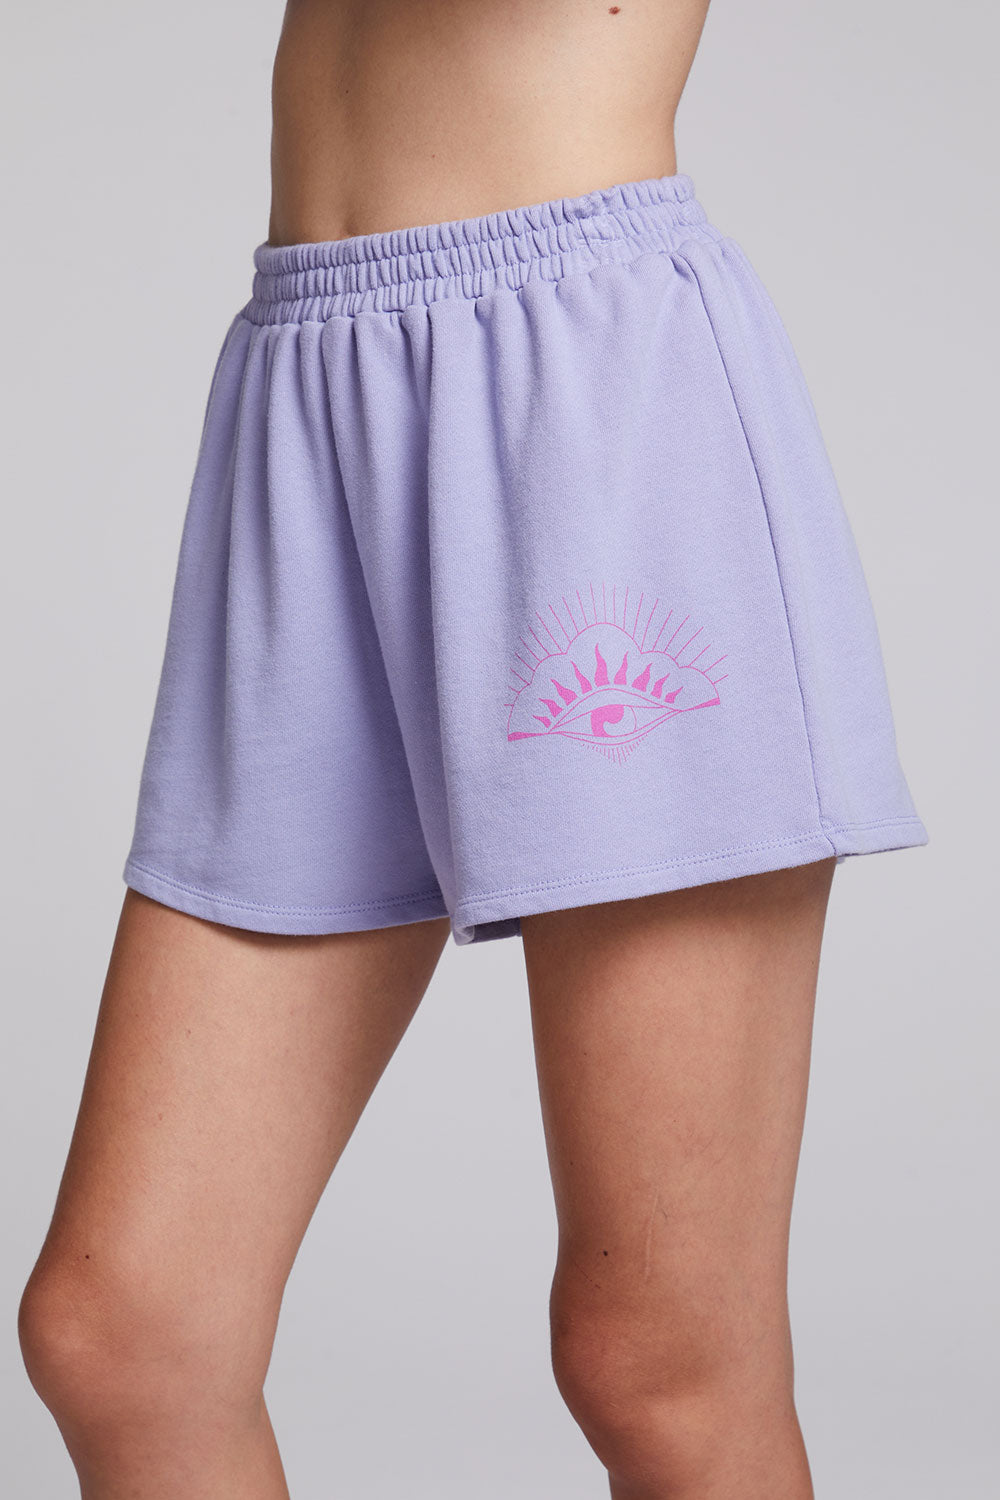 High Road Shorts WOMENS chaserbrand